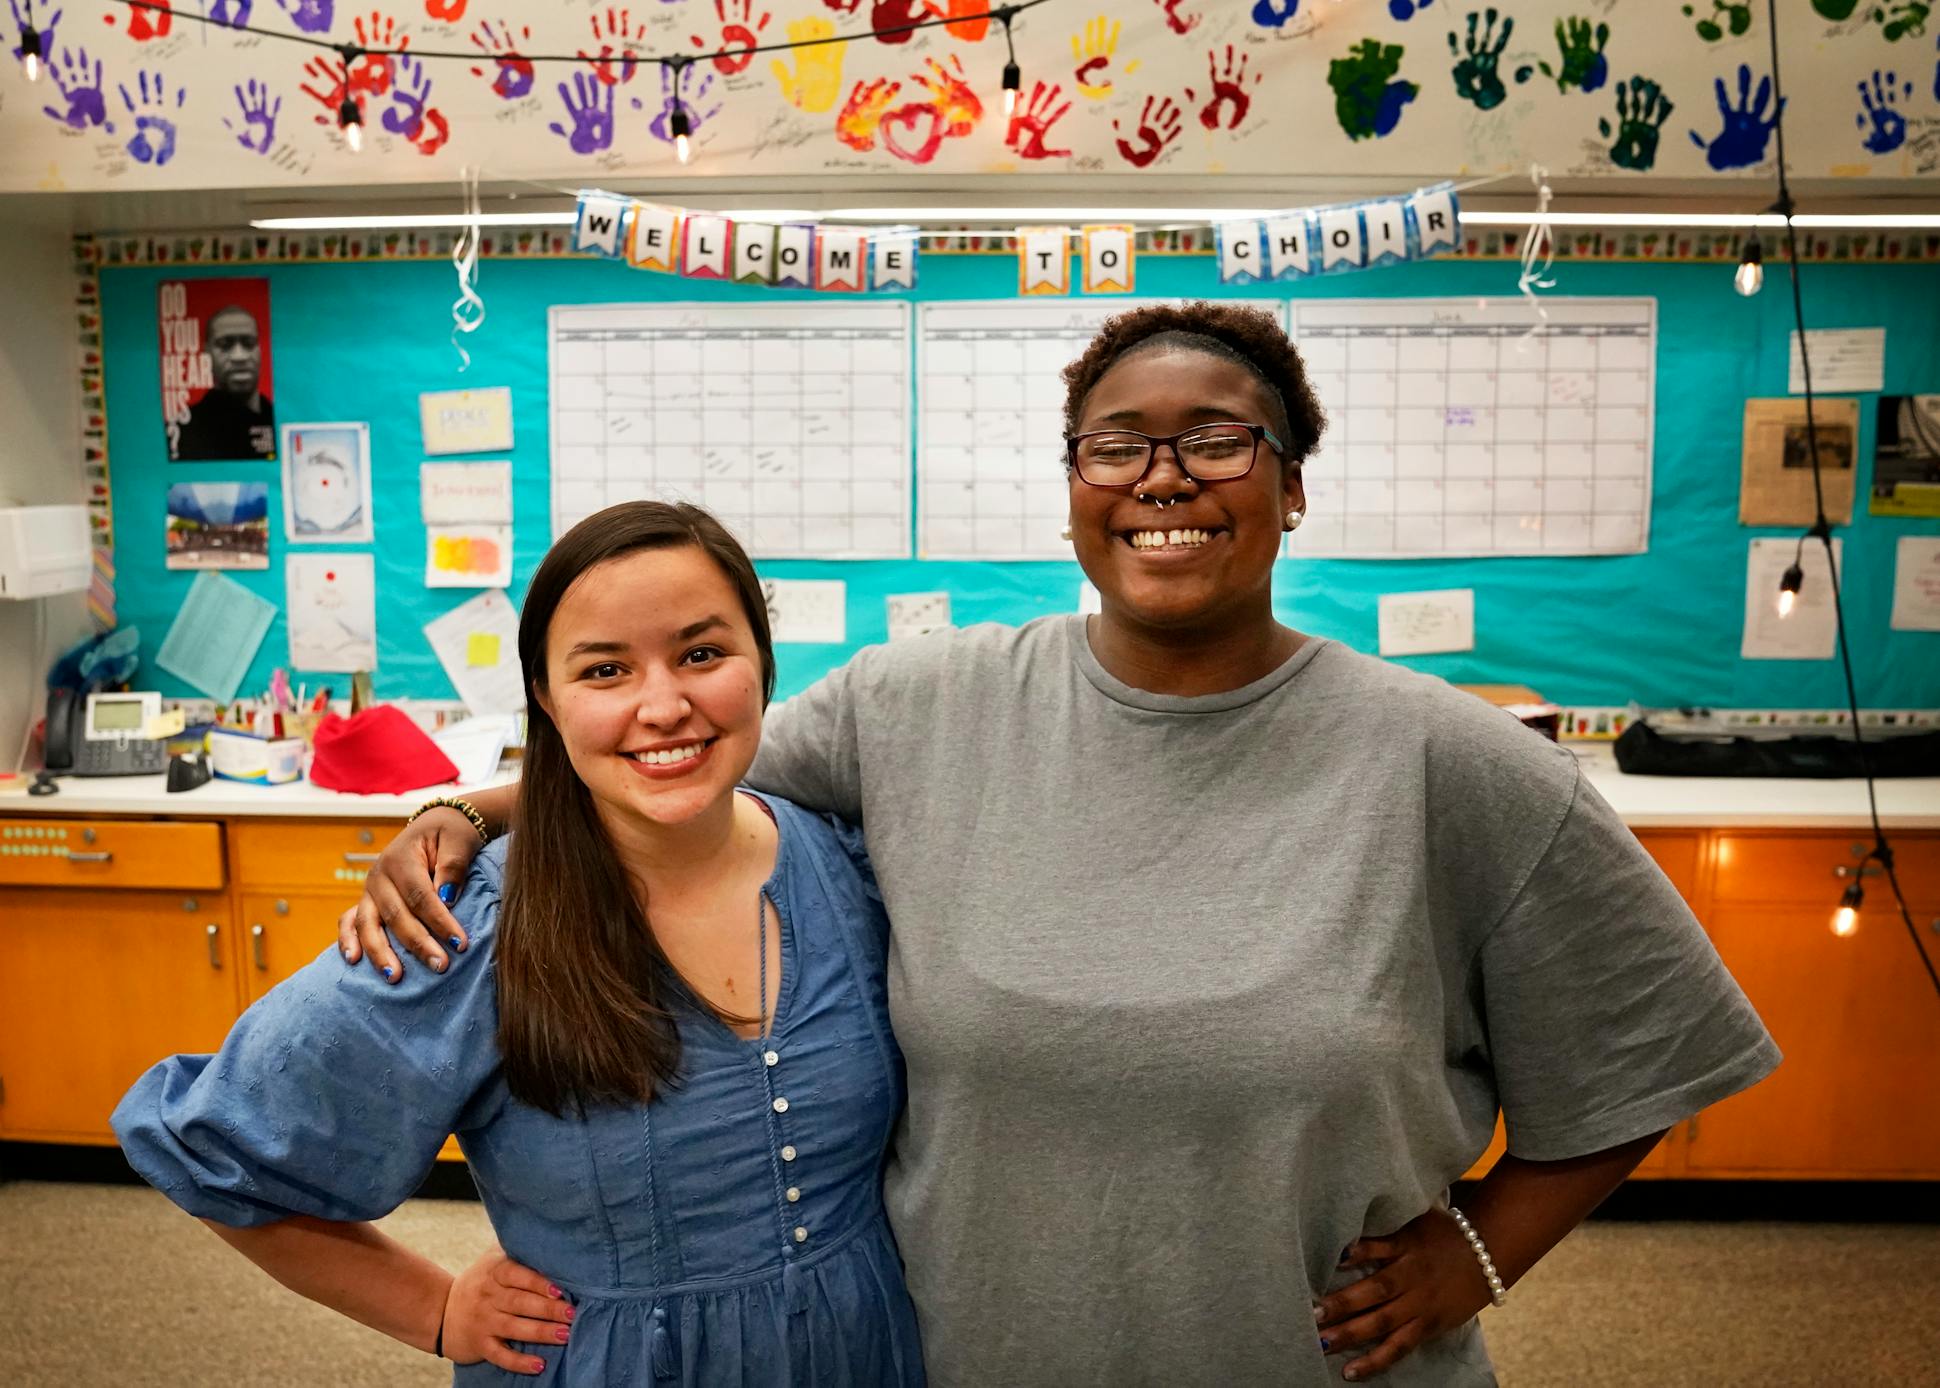 St. Paul Harding High School senior Erin Tetter, right, has looked to choir teacher Natalia Romero Arbelaez for guidance and inspiration and the student and teacher were seen in choir class at Harding High Thursday, May 26, 2022 in St. Paul, Minn. ] DAVID JOLES • david.joles@startribune.com Six graduating seniors thank the people who inspired them most this year**Erin Tetter, Natalia Romero Arbelaez, cq, (EDITOR’S NOTE: THERE IS AN ACCENT OVER THE SECOND A IN ARBELAEZ)